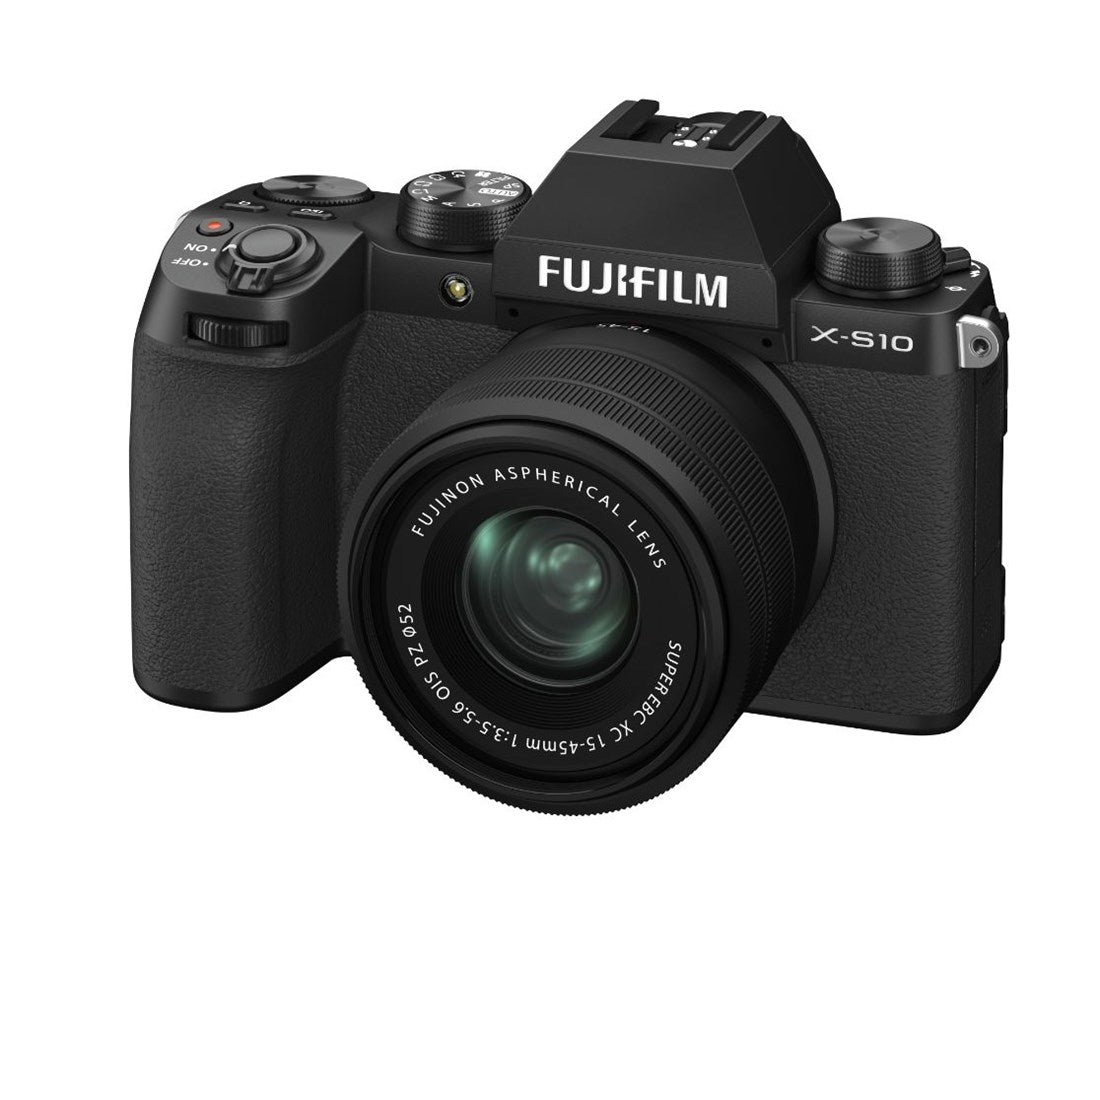 Product Image of Fujifilm X-S10 Camera with XC 15-45mm F3.5-5.6 OIS PZ Lens - Black